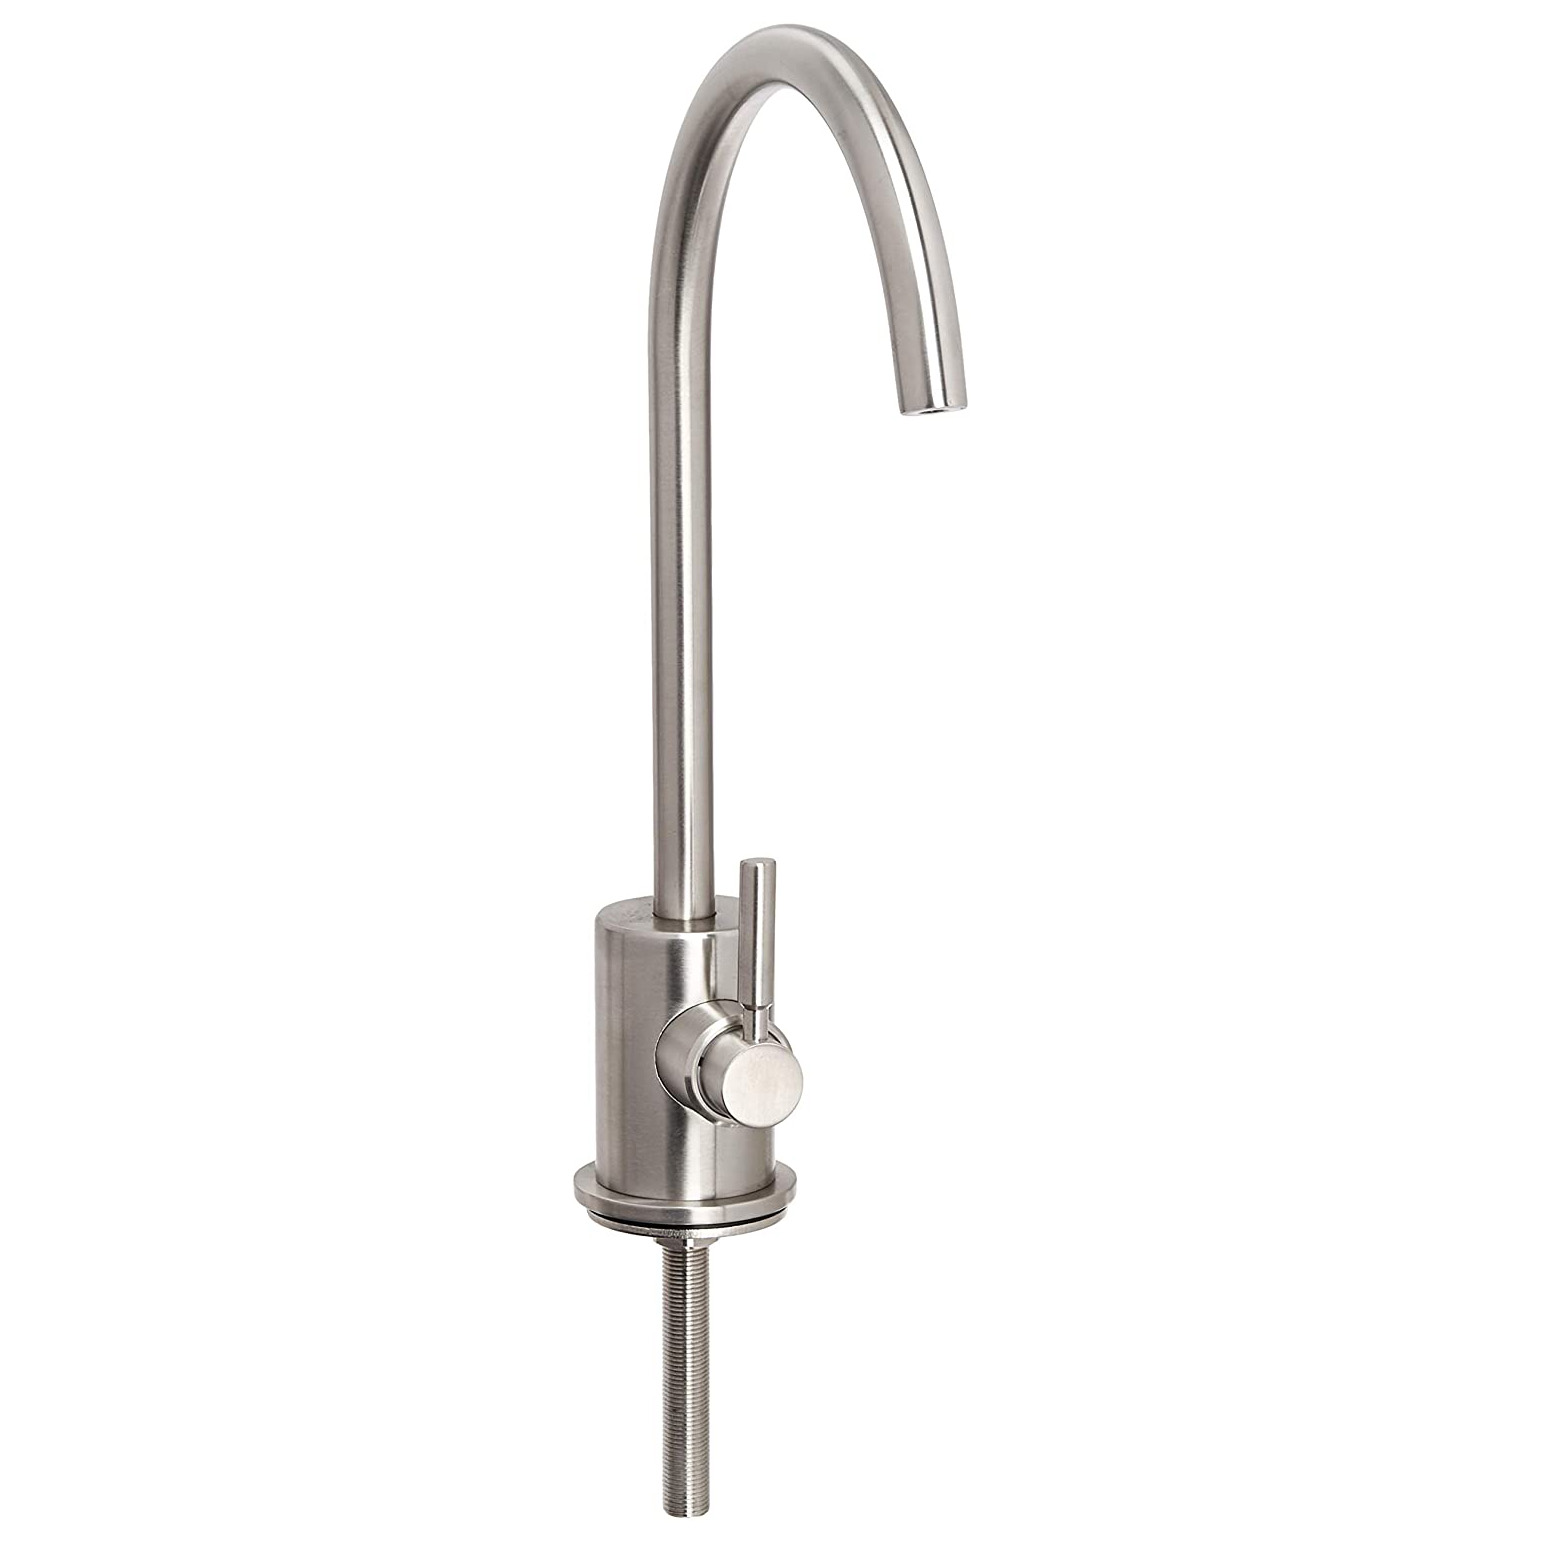 Lux C-Spout Filter Faucet in Stainless Steel w/Metal Lever